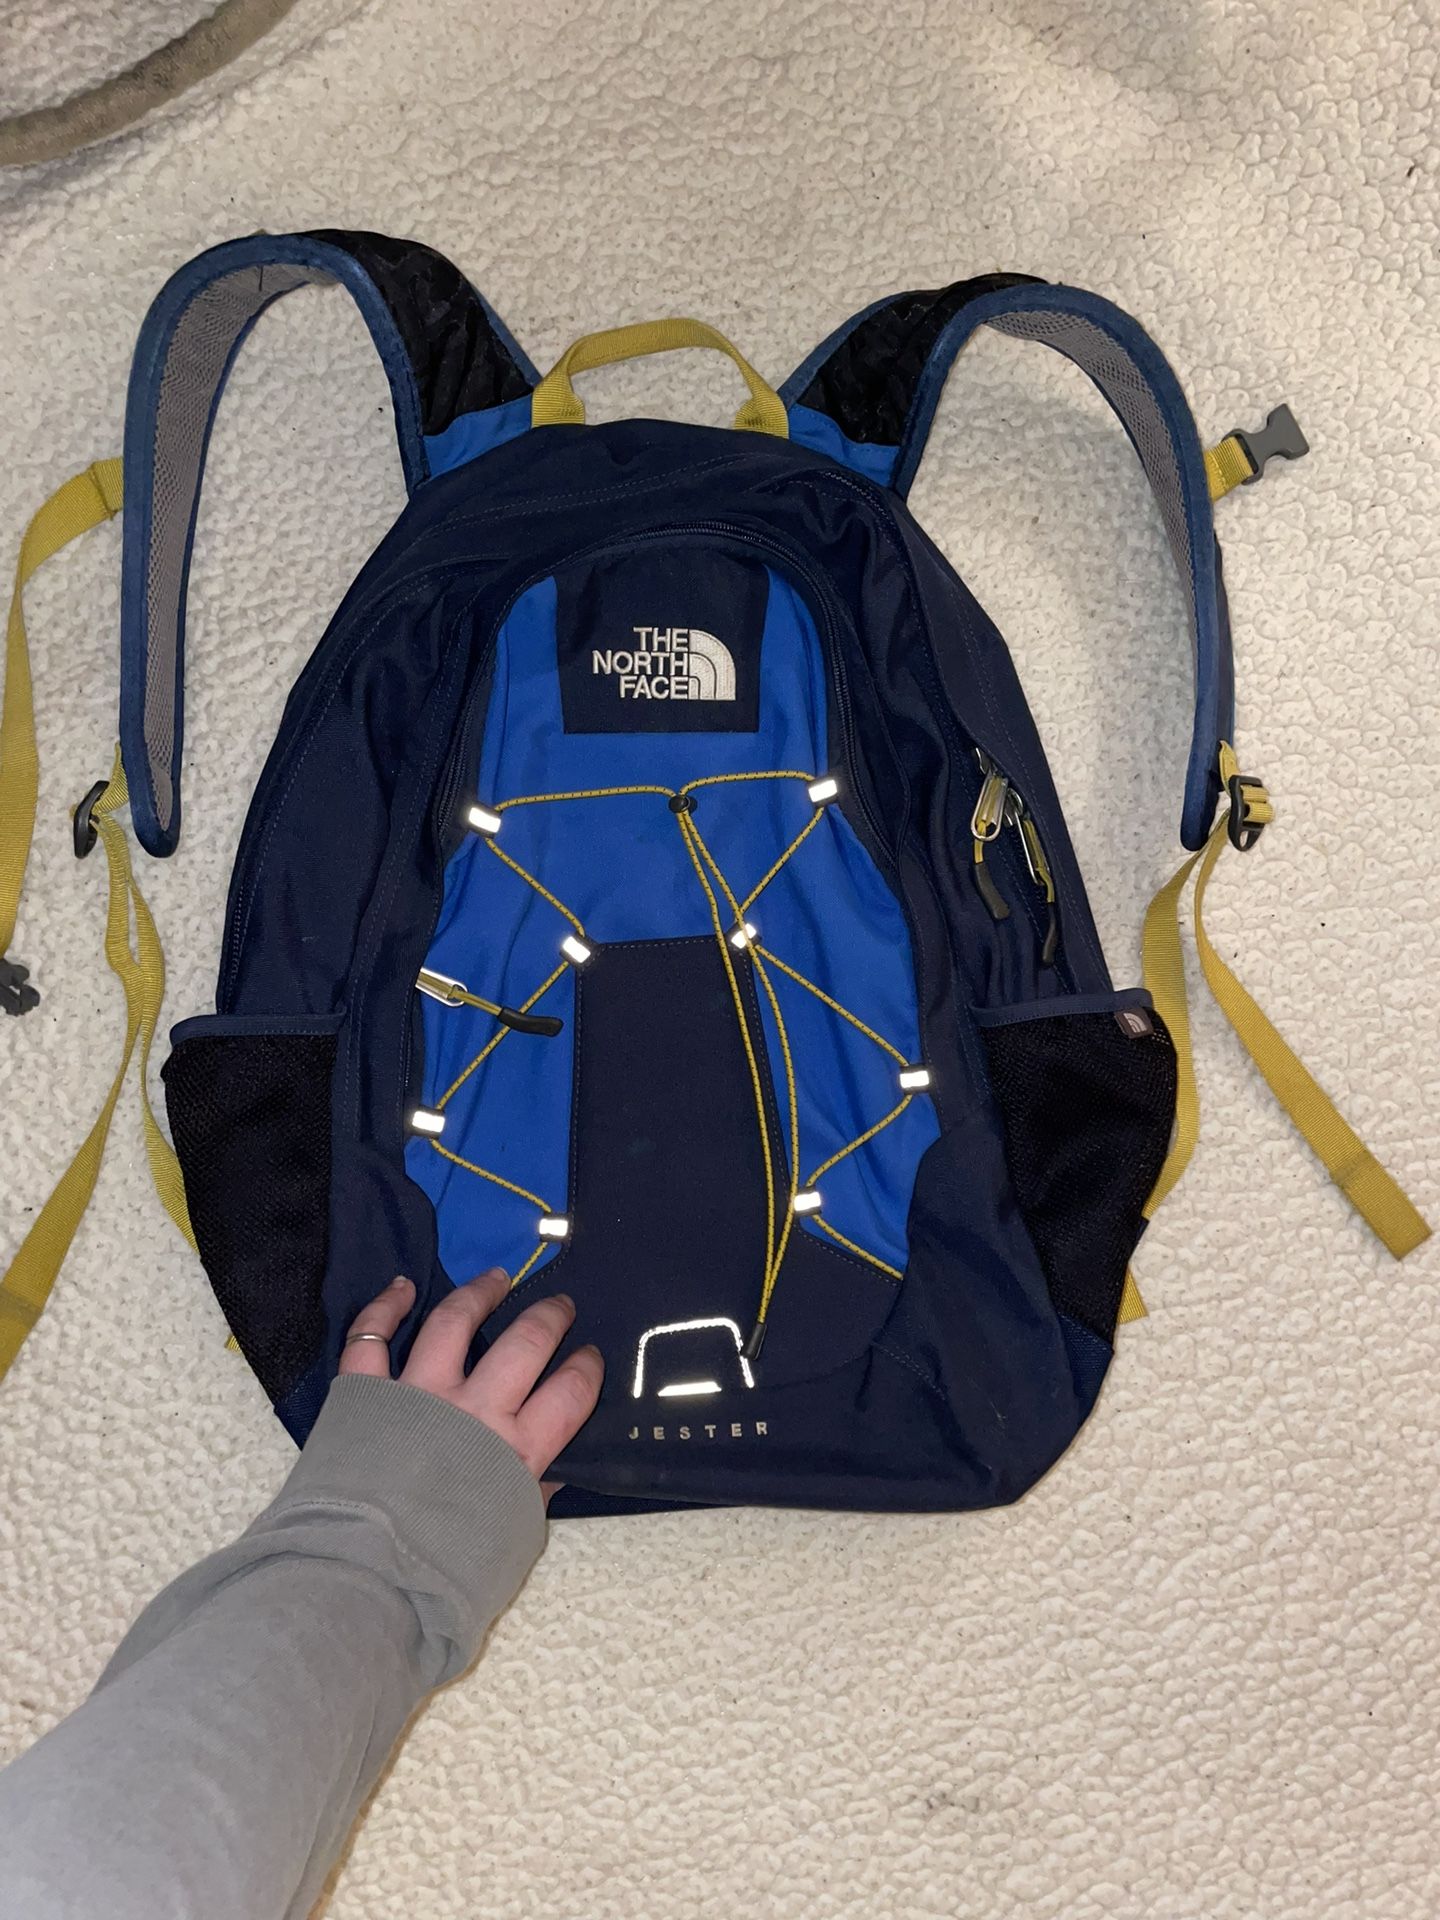 North Face and Jansport backpacks 